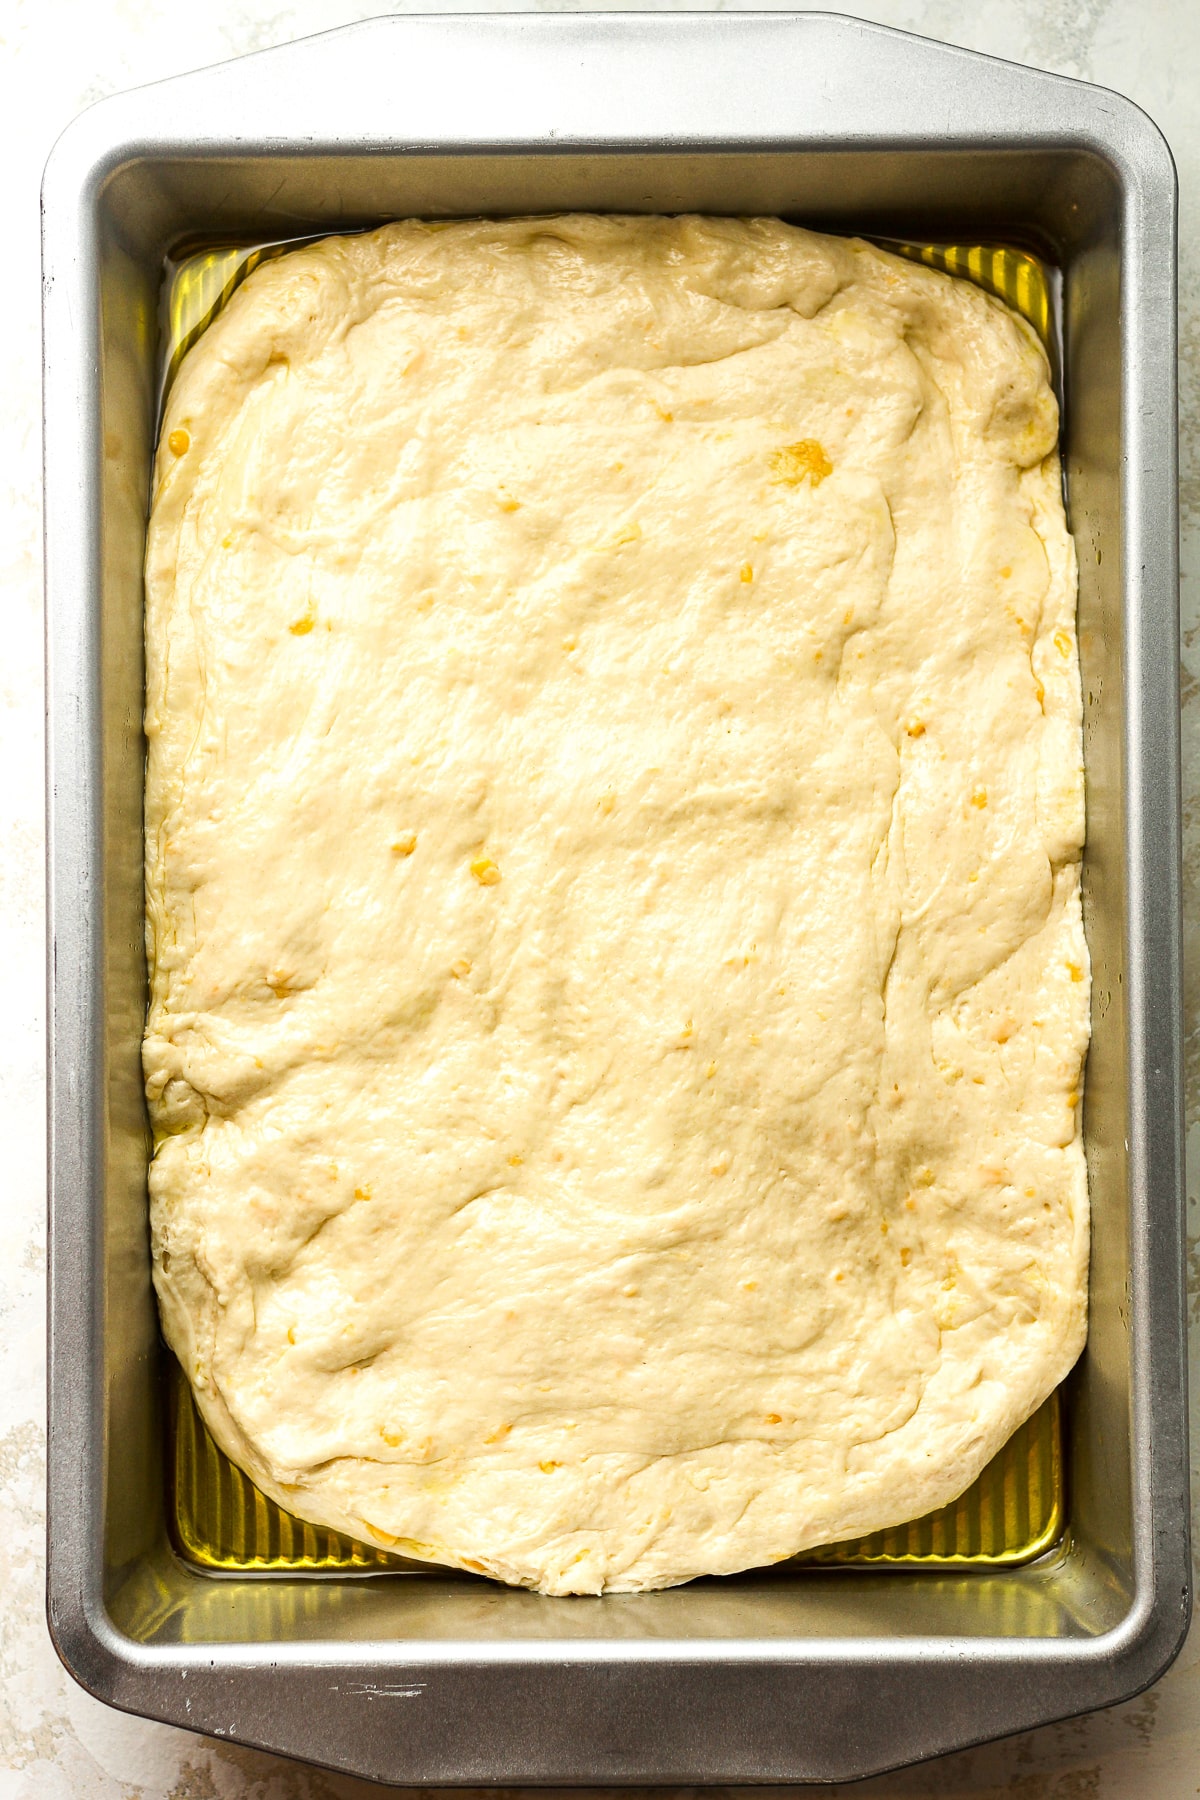 A pan of the dough wit olive oil.